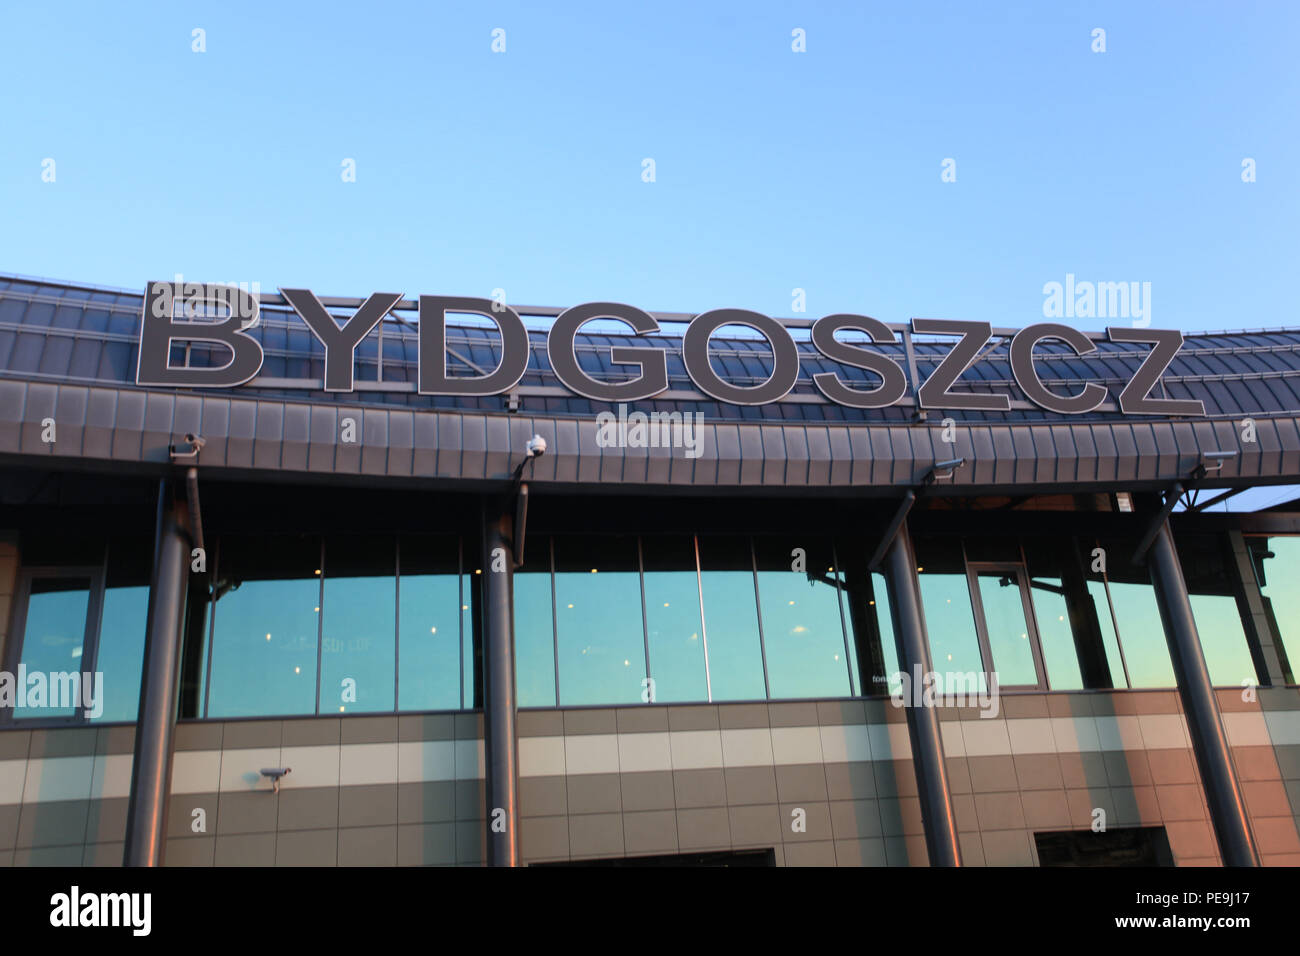 Bydgoszcz airport sign during sunset Stock Photo